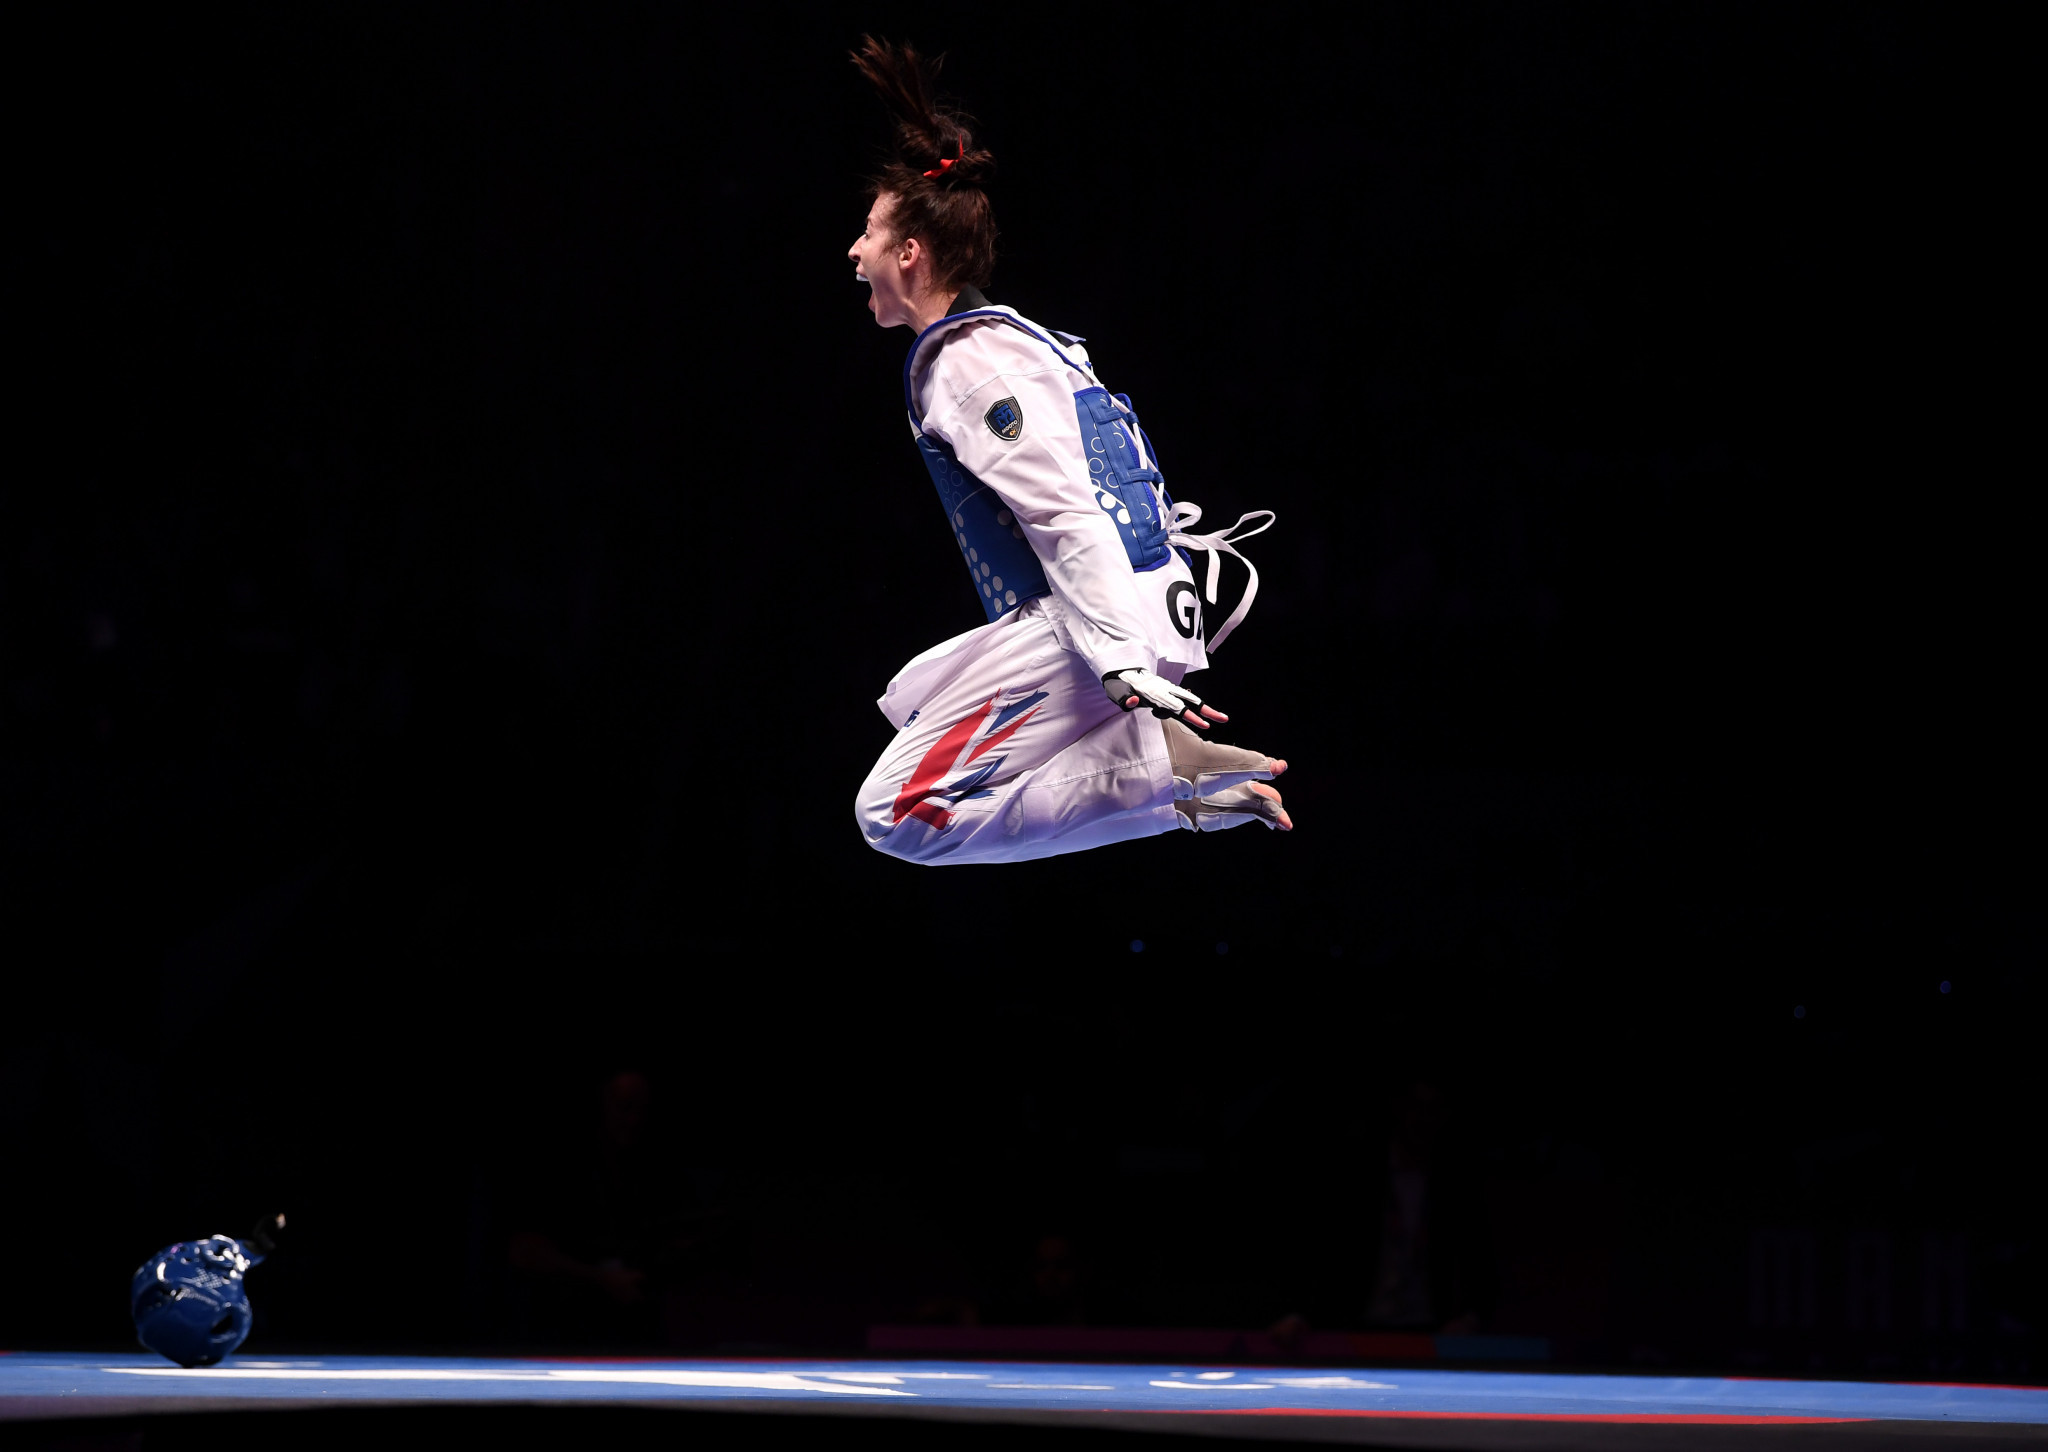 Bianca Walkden defended her women's over-73 title at the European Taekwondo Championships in Manchester ©Getty Images